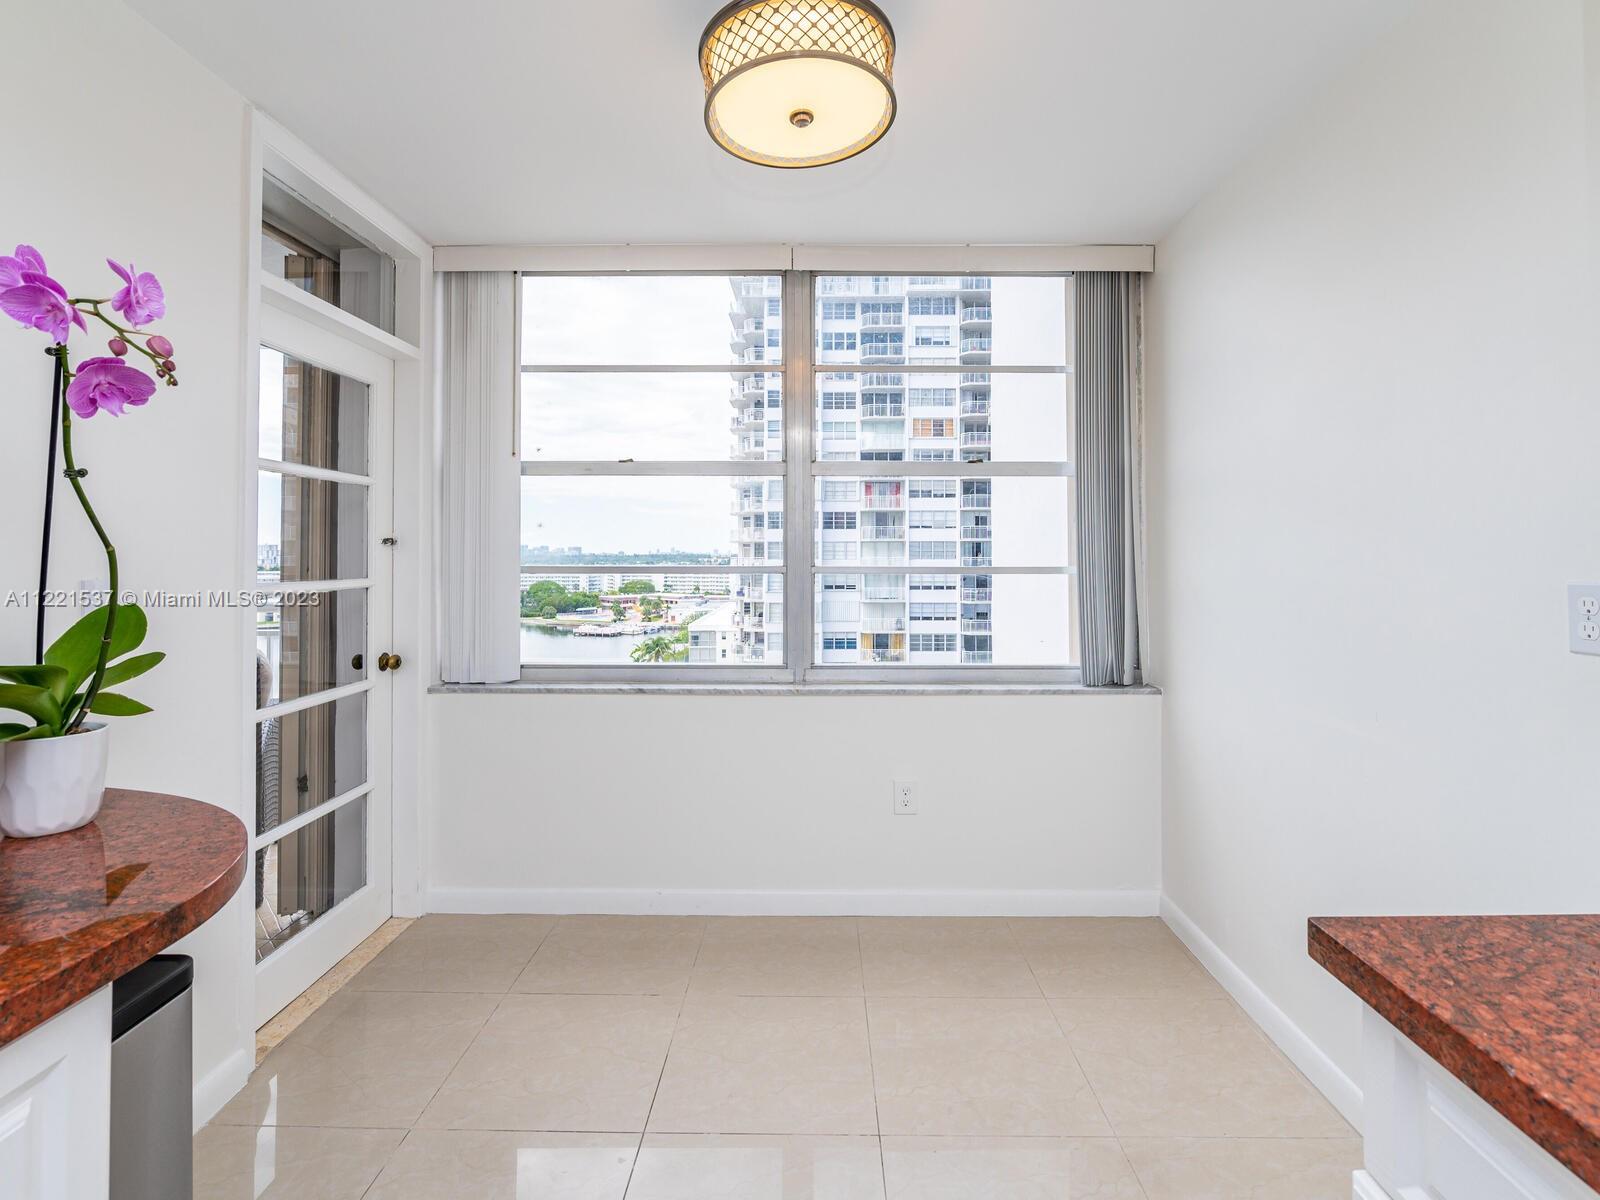 Dine-in kitchen with a great view and access to the balcony.